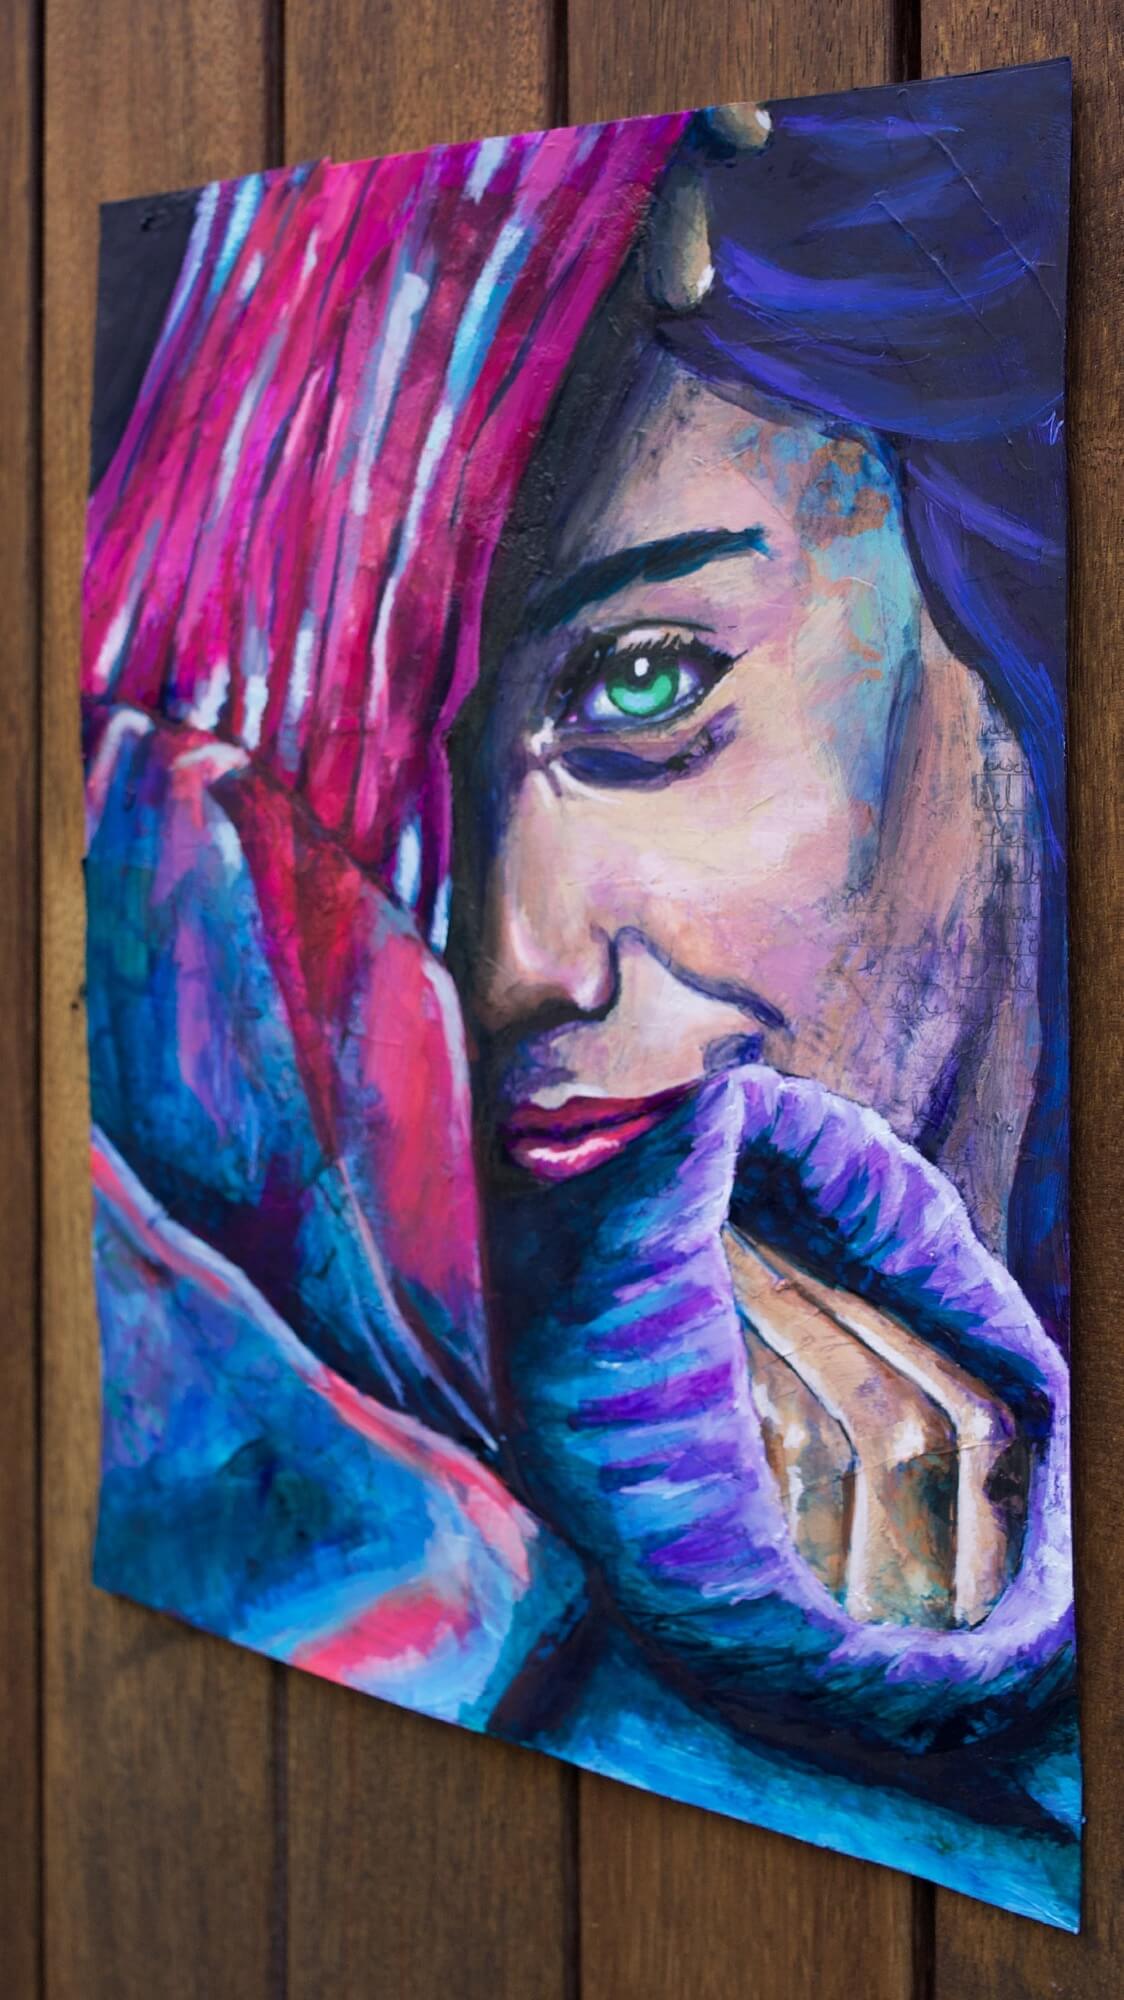 Mixed media painting of a woman wearing a sweater in pink and blue